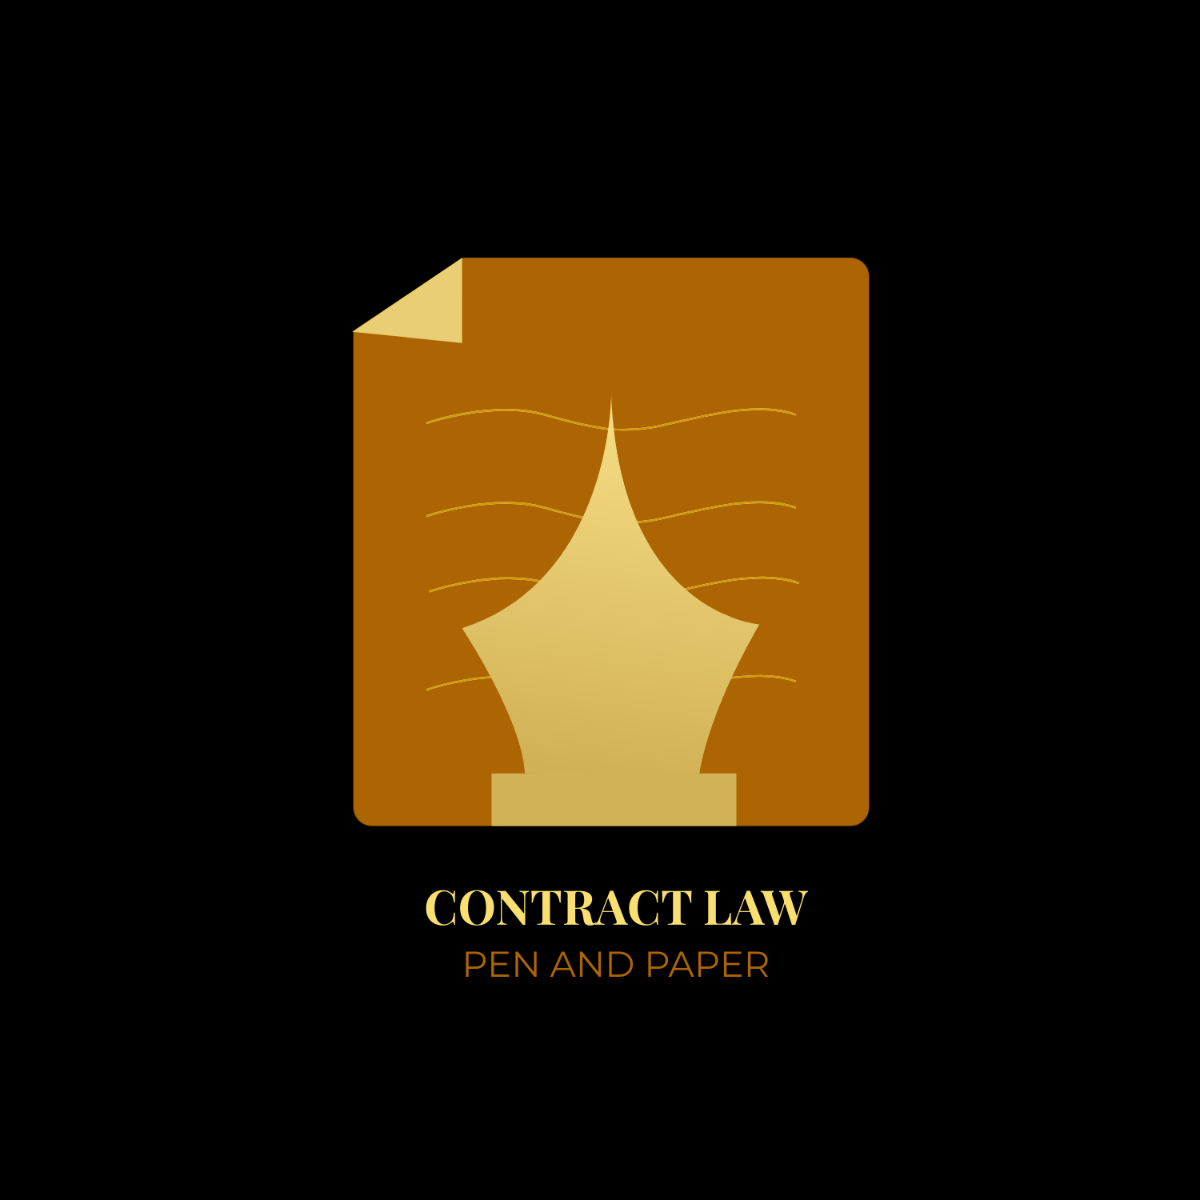 Contract Law Pen and Paper Logo